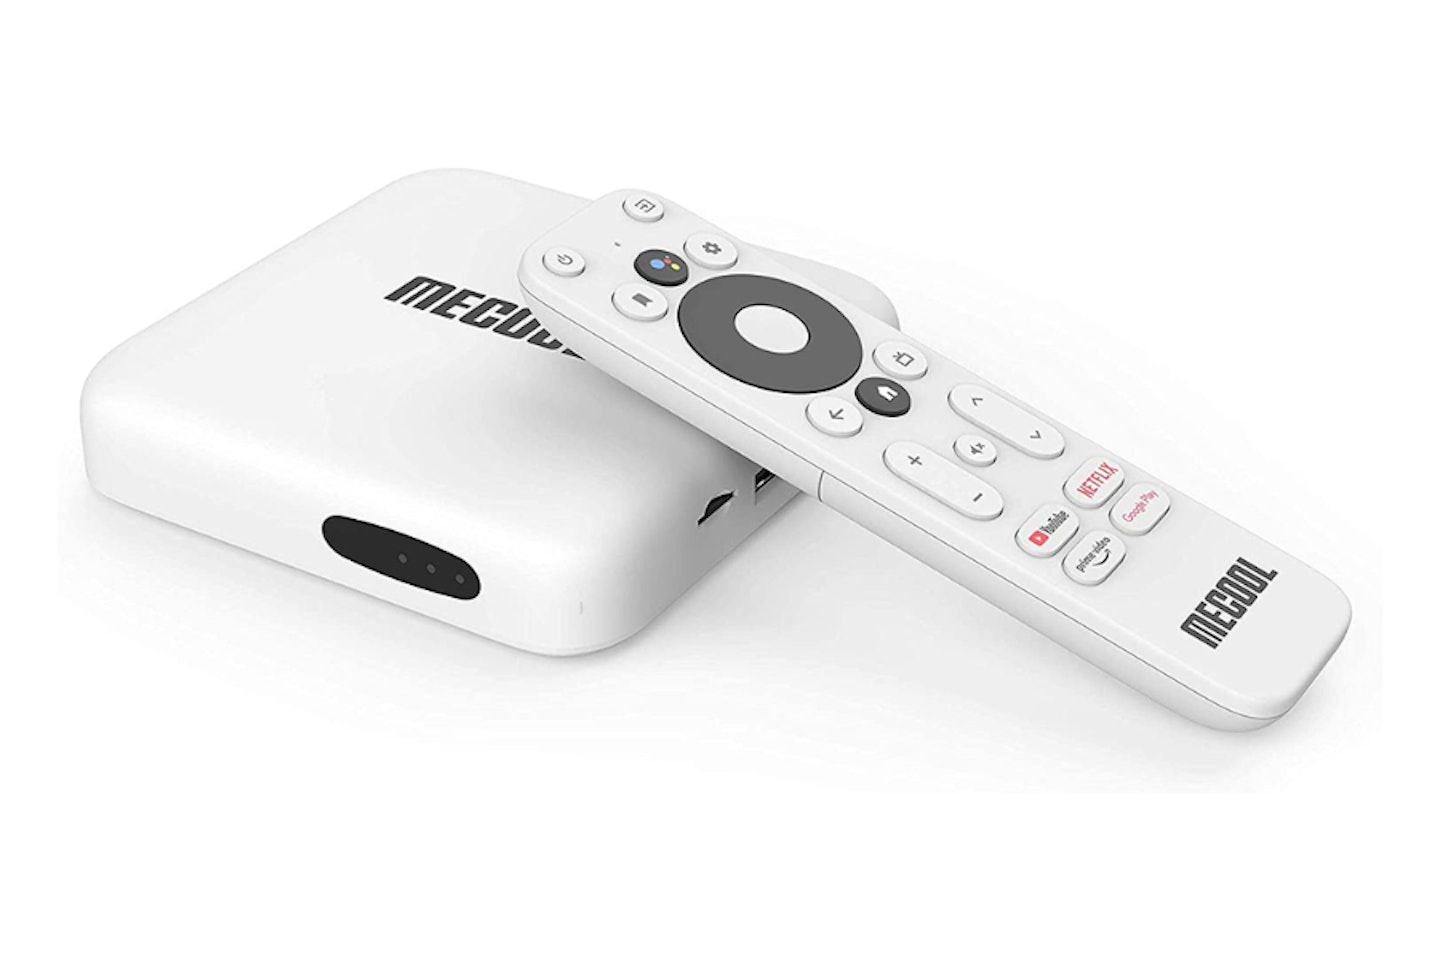 Android TV Box available in the UK